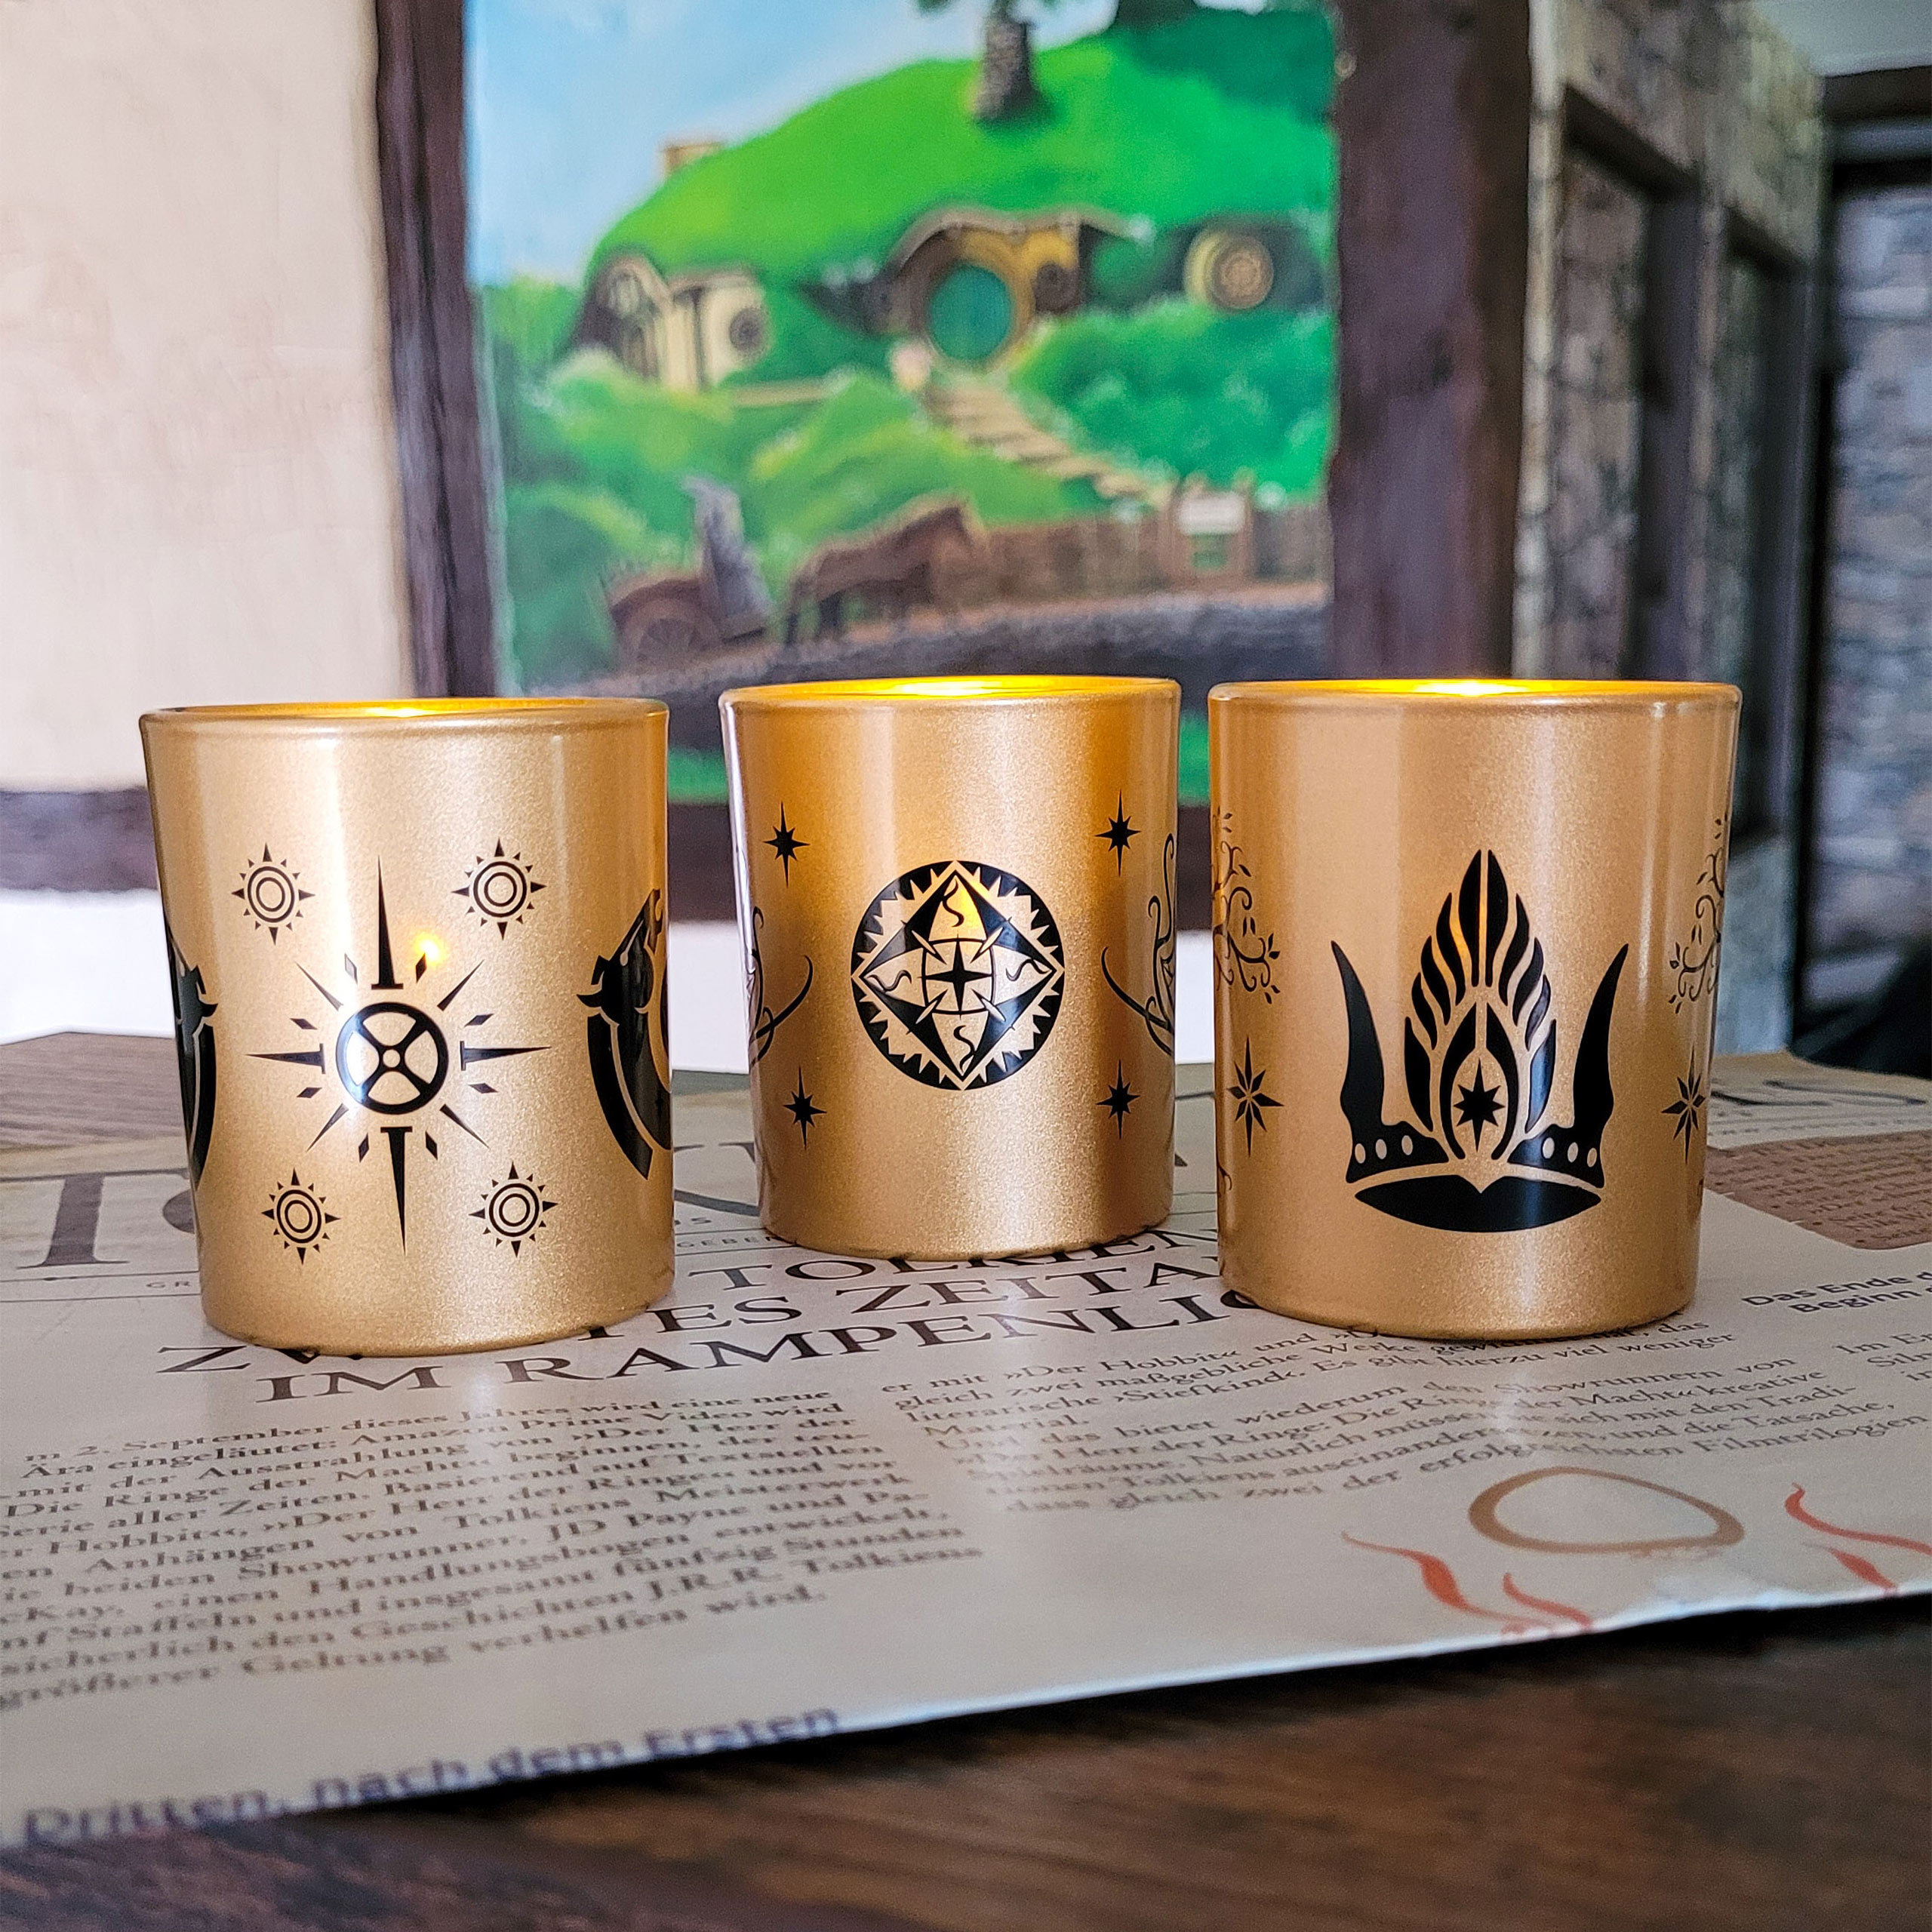 Lord of the Rings - Middle Earth Tealight Holder Set of 3